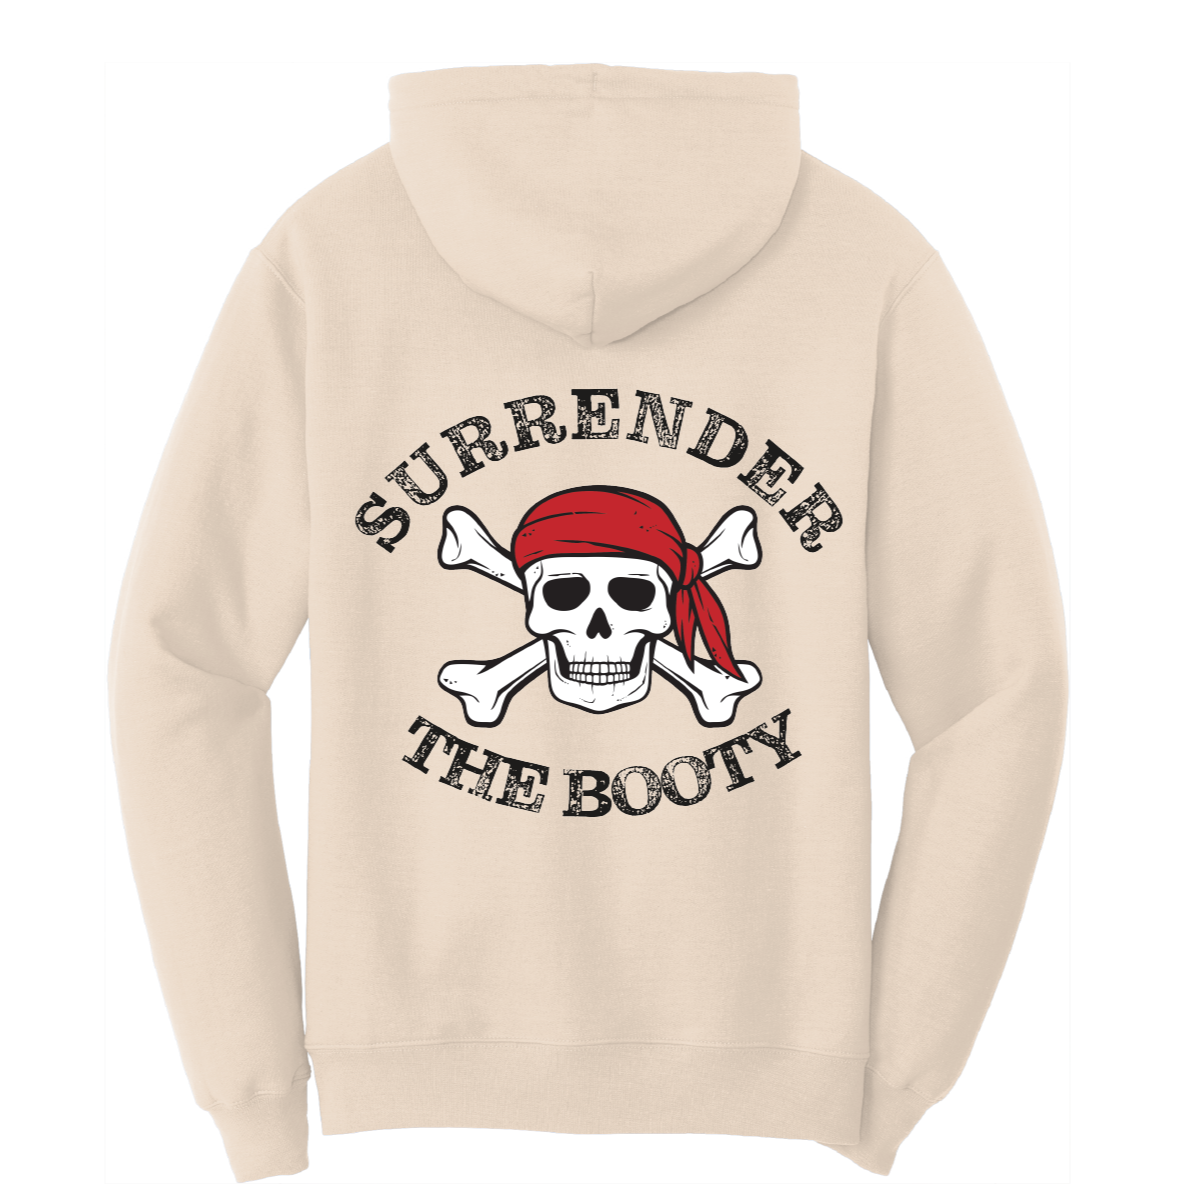 Key West Surrender the Booty Cotton Hoodie 1009